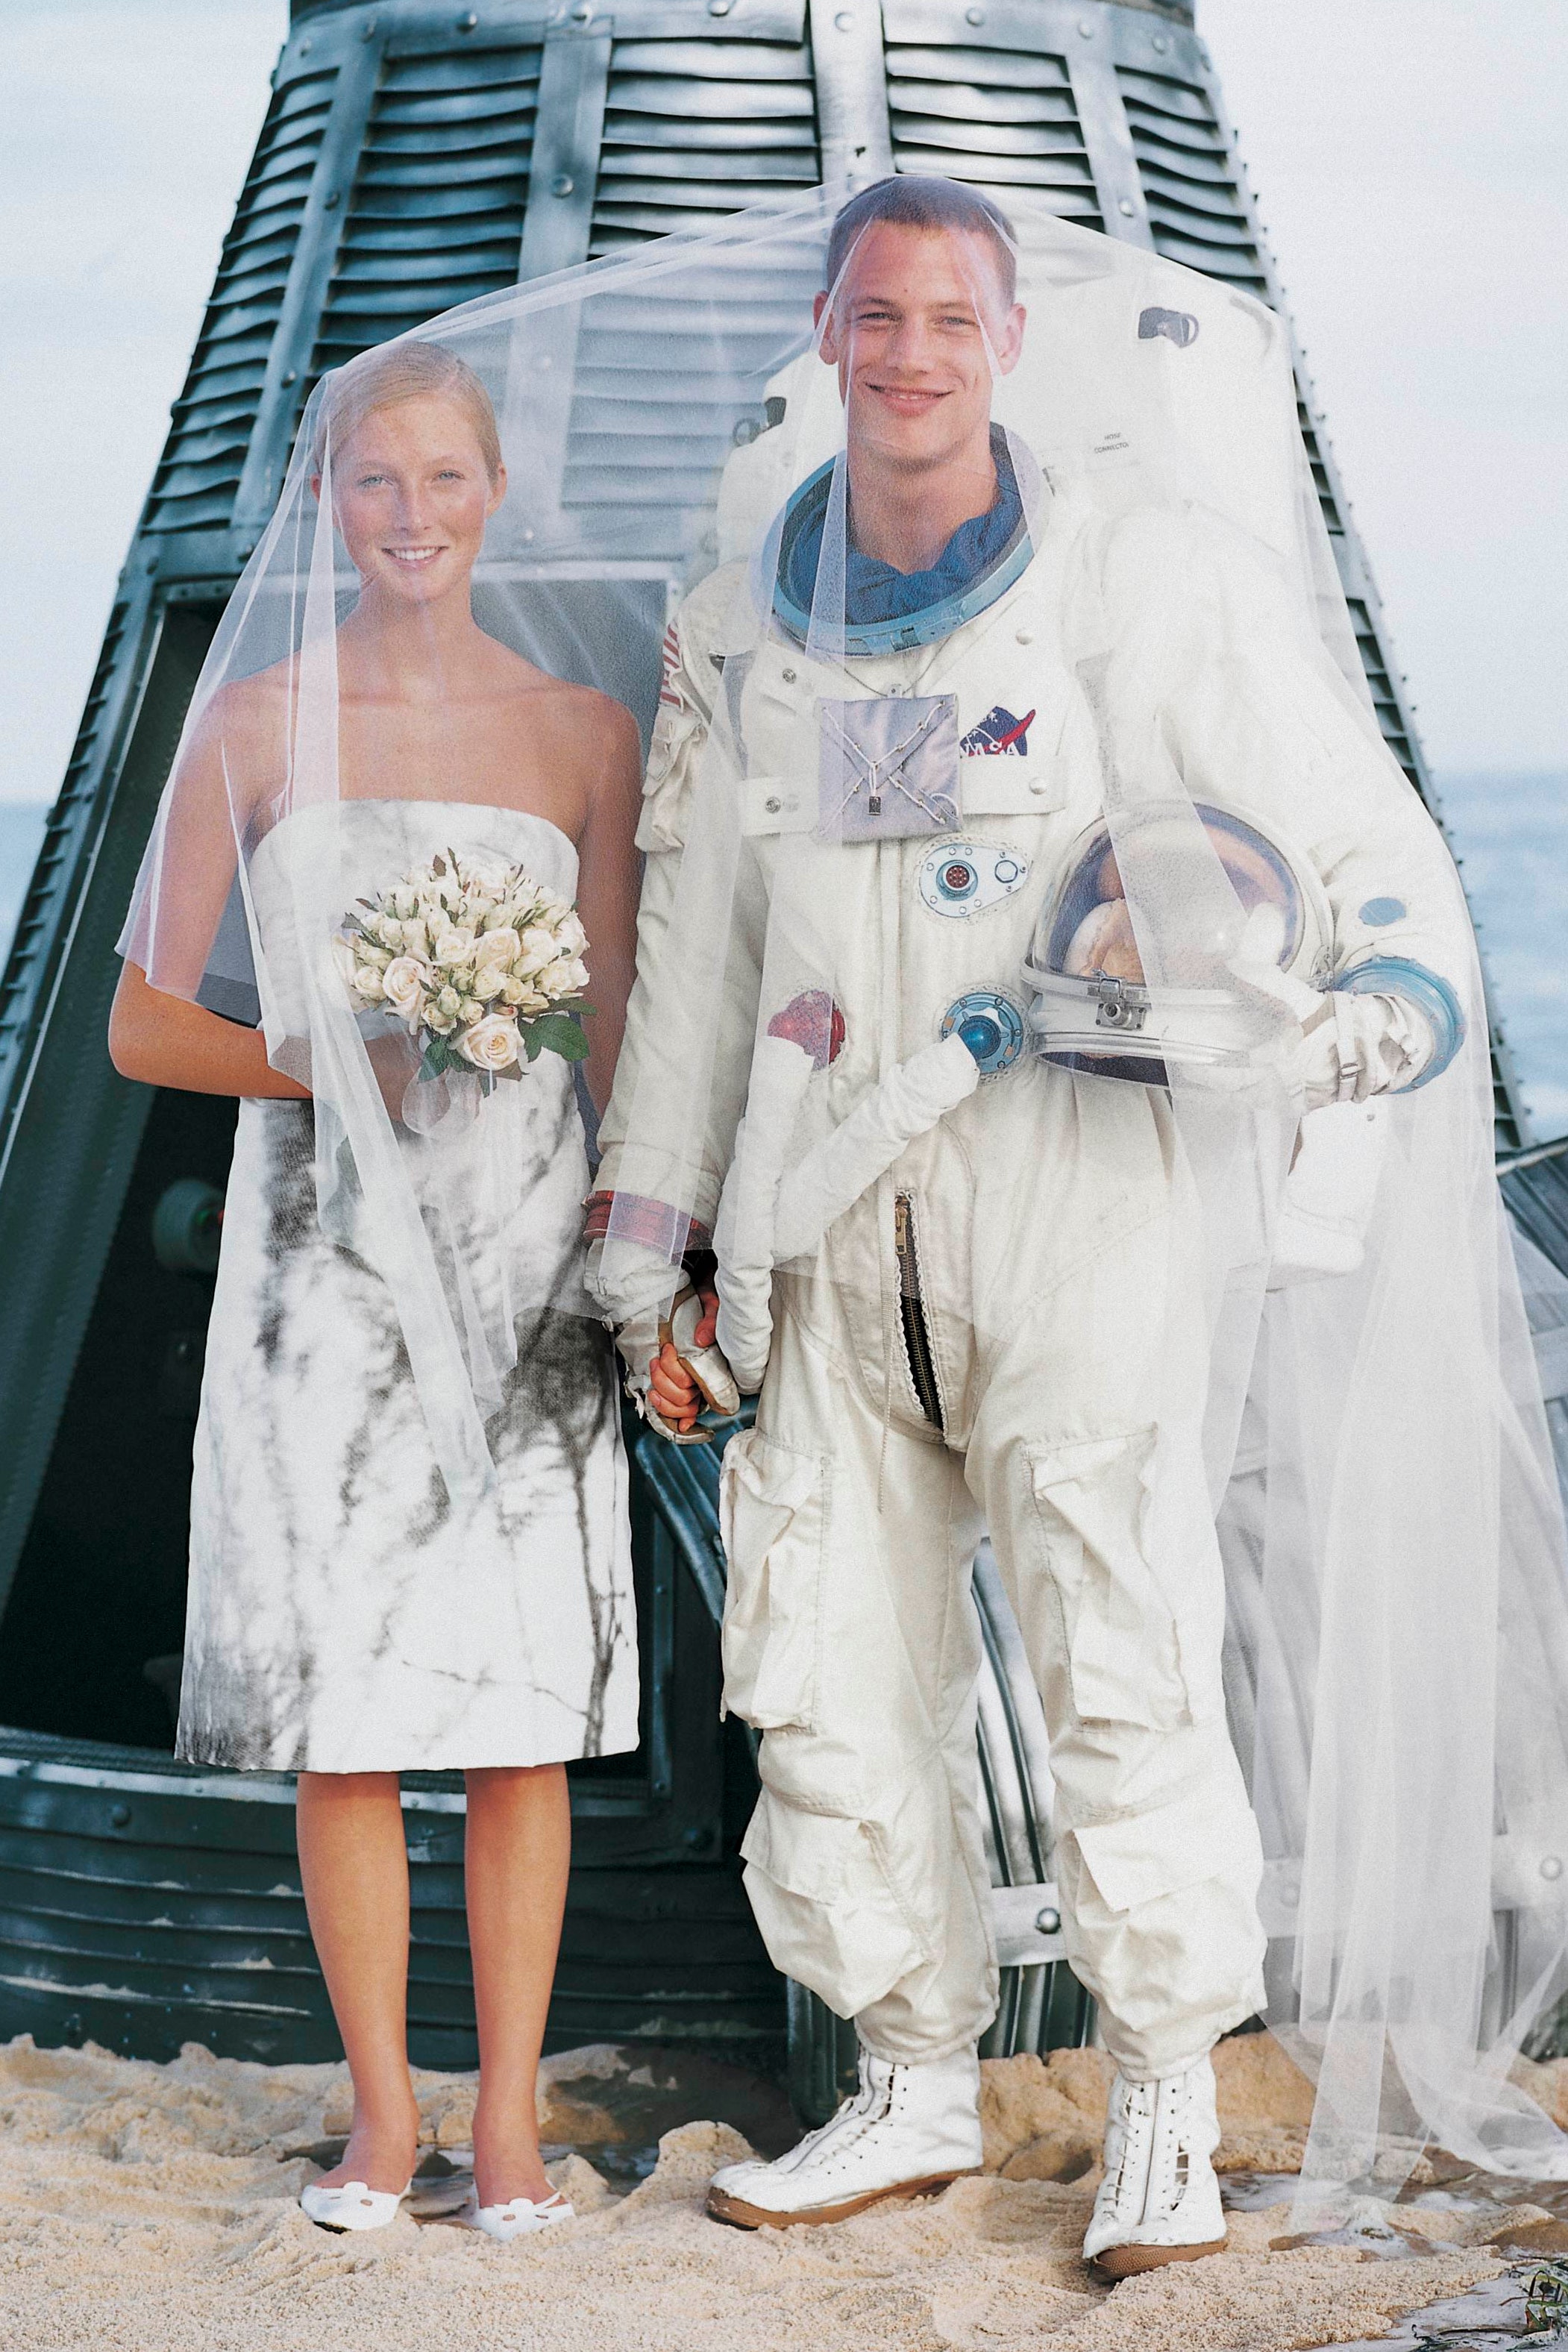 UNSPECIFIED  NOVEMBER 1  Model Maggie Rizer and US astronaut standing as bride and groom before a beached space capsule...